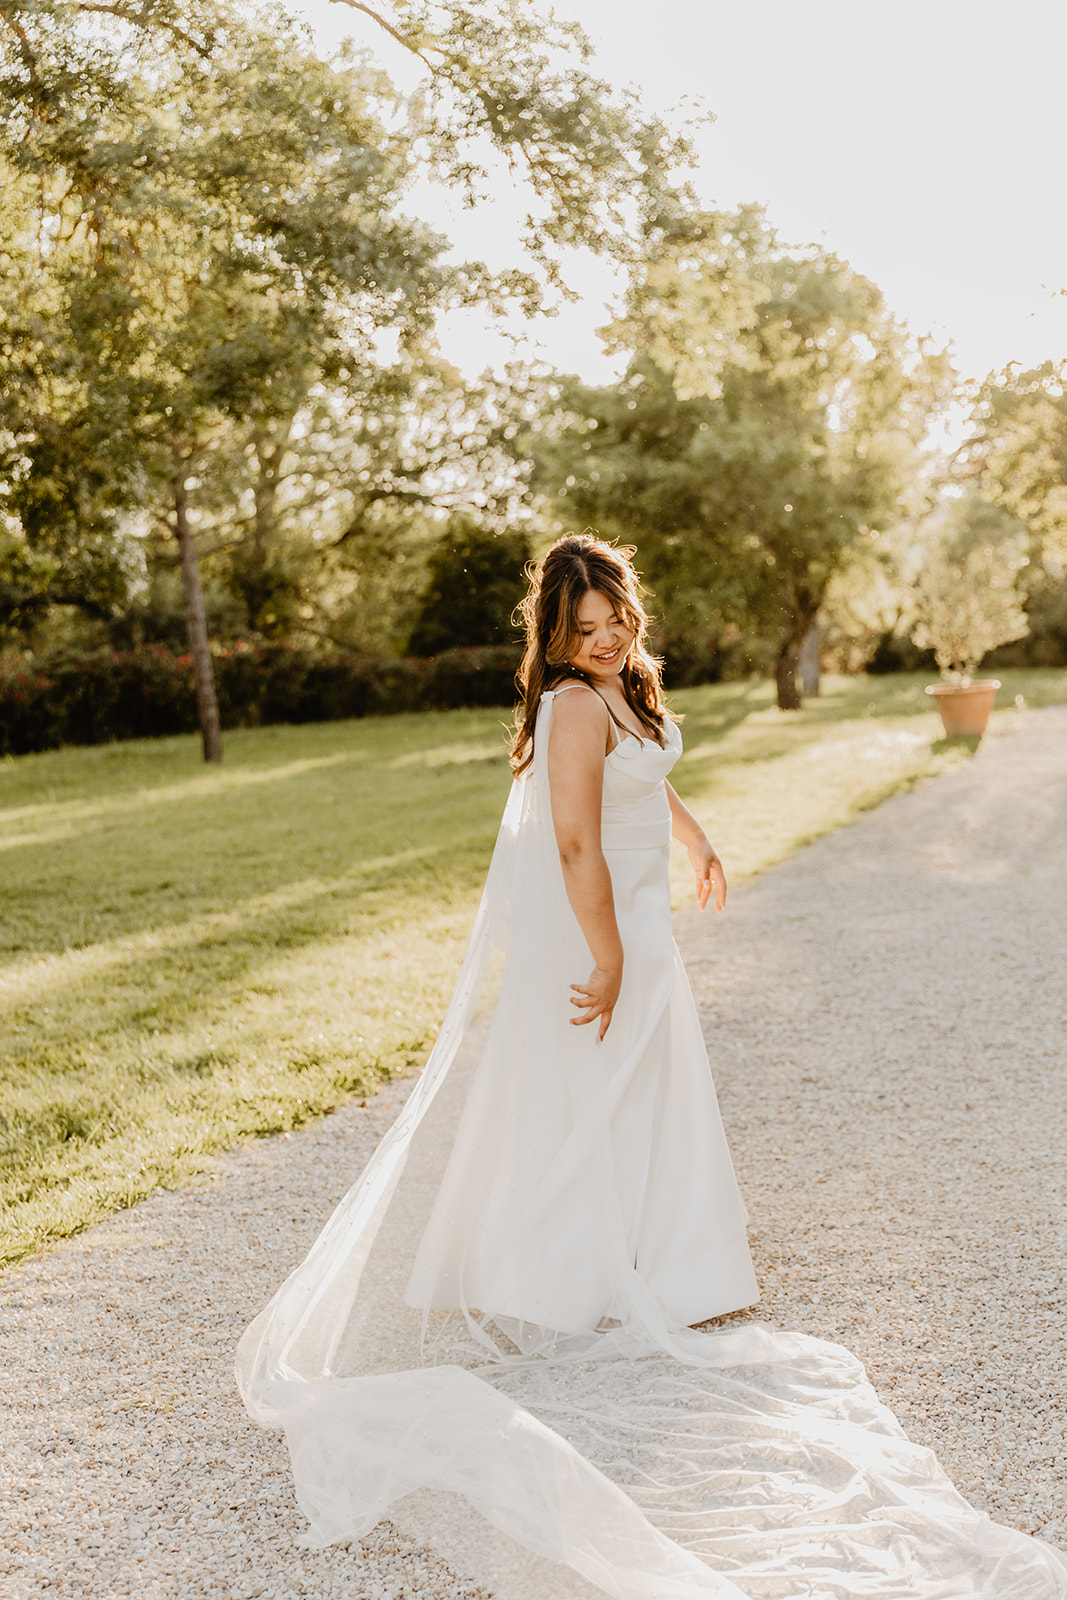 Bride at golden hour at a France Destination Wedding. Photography and Videography by Olive Joy Photography